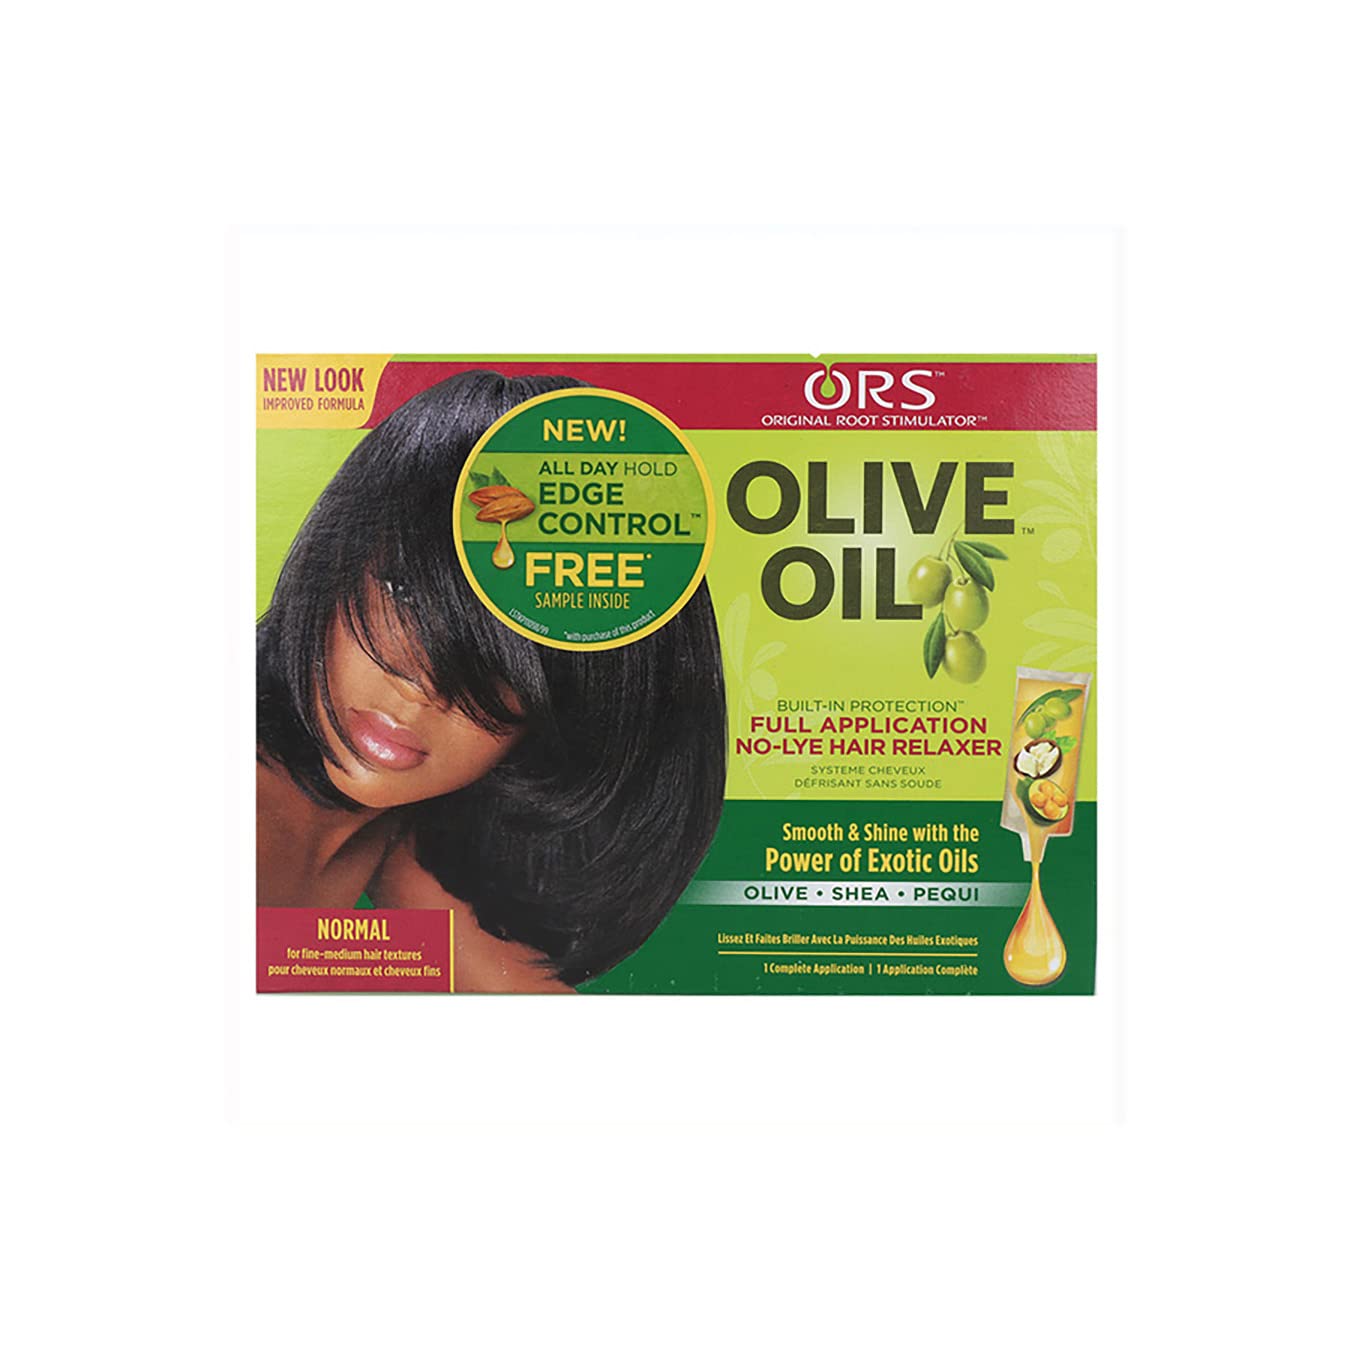 ORS Olive Oil Built-In Protection Full Application No-Lye Hair Relaxer - Normal (11098) Find Your New Look Today!